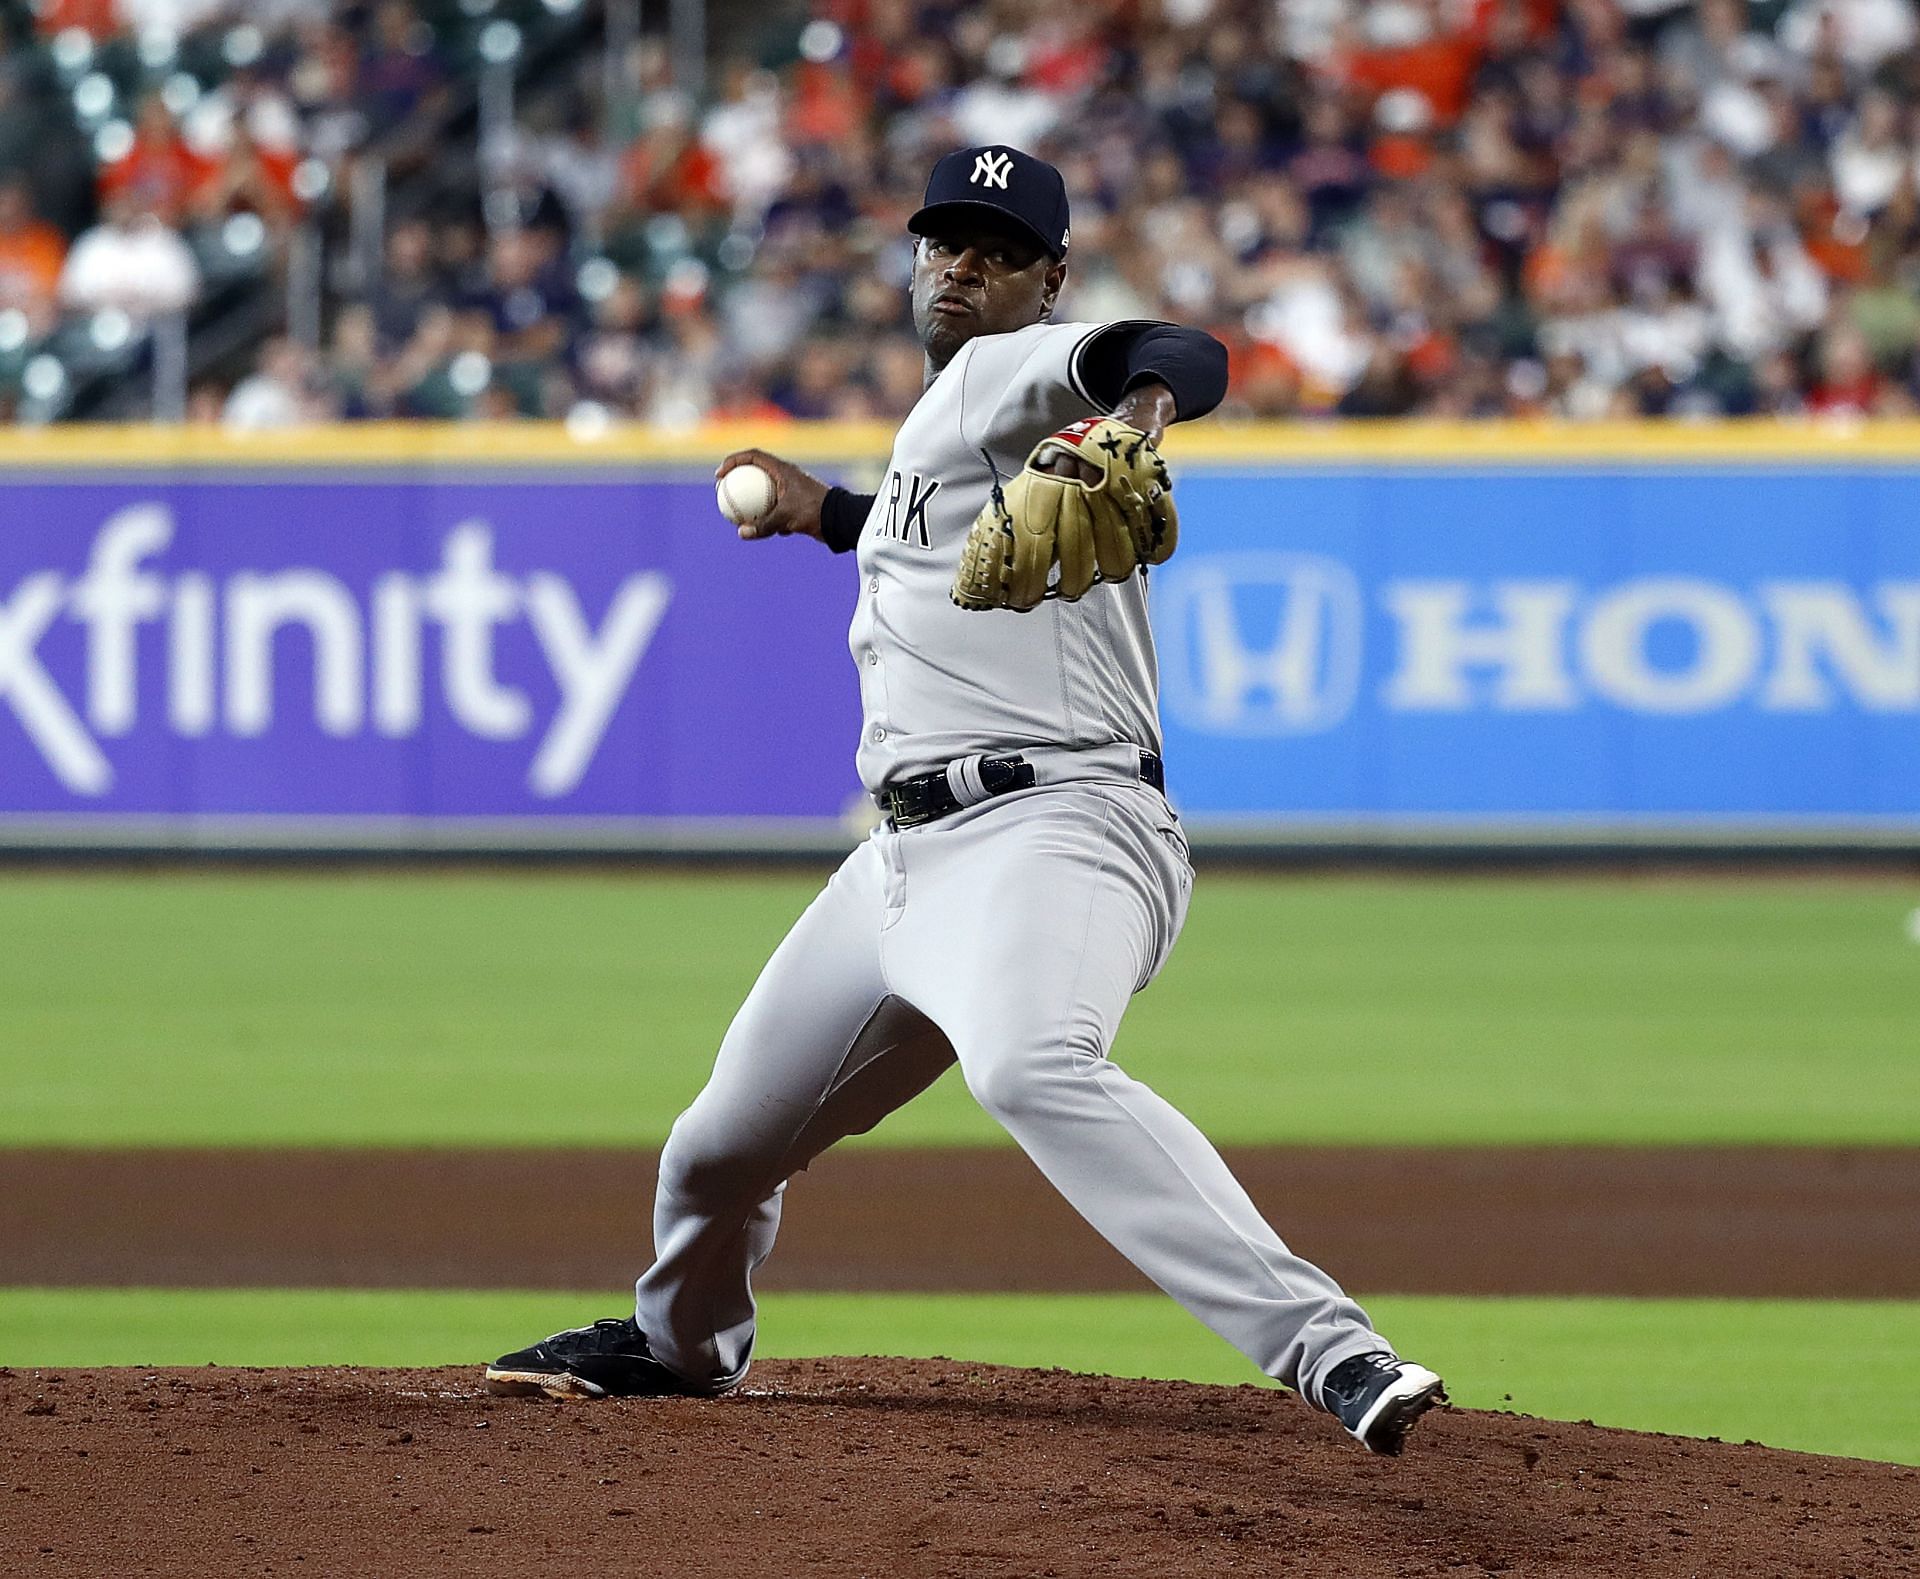 New York Yankees starting pitcher Luis Severino nailed Houston Astros base runner Kyle Tucker while he was trying to steal home on Thursday night.